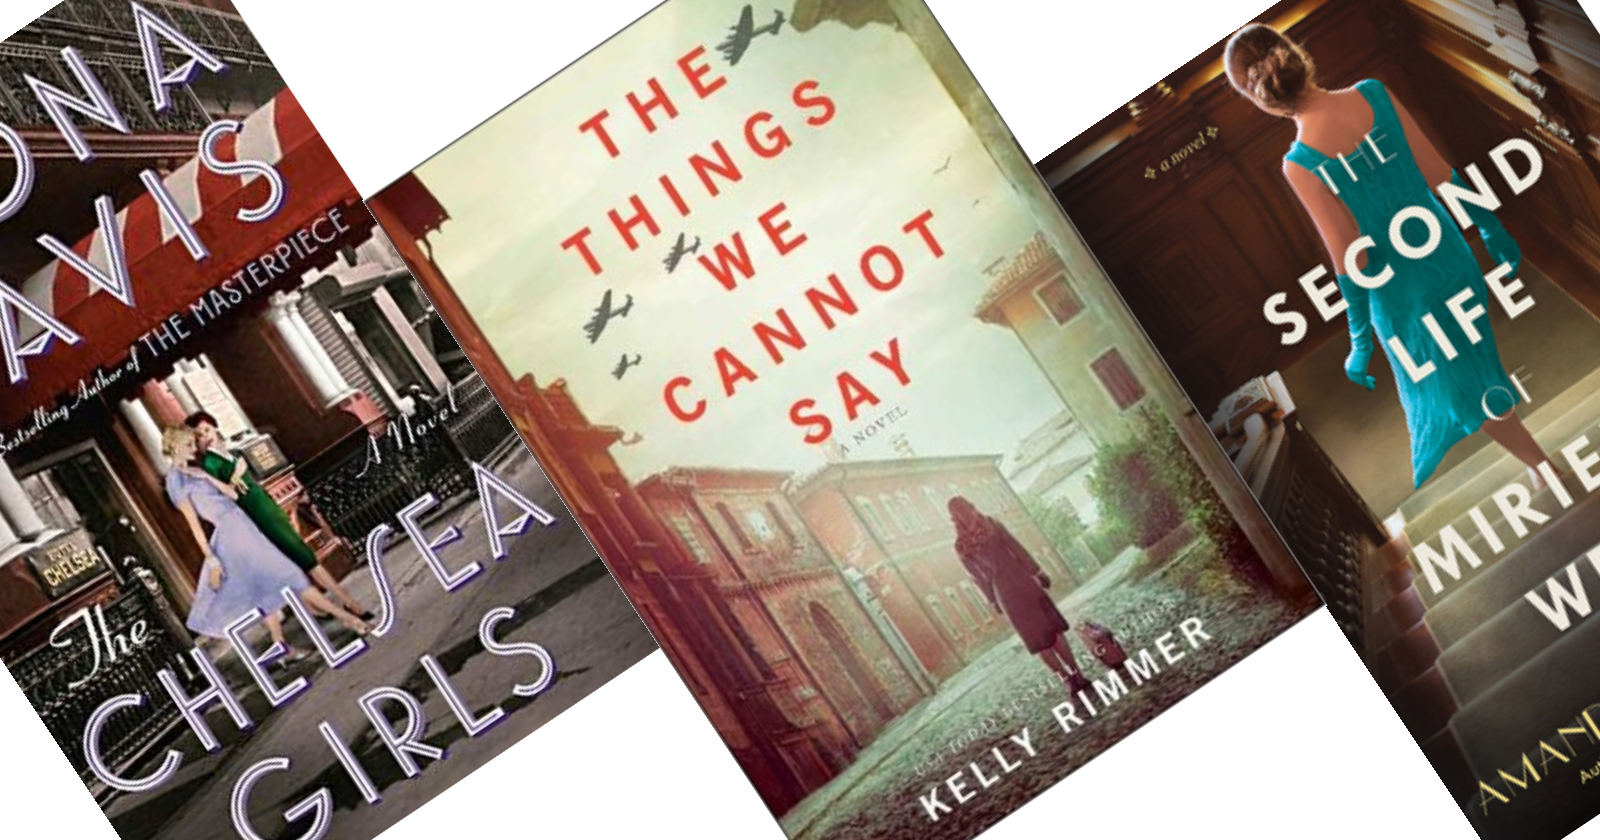 Three tilted book covers - center image has a light sky and buildings with the title The Things We Cannot Say